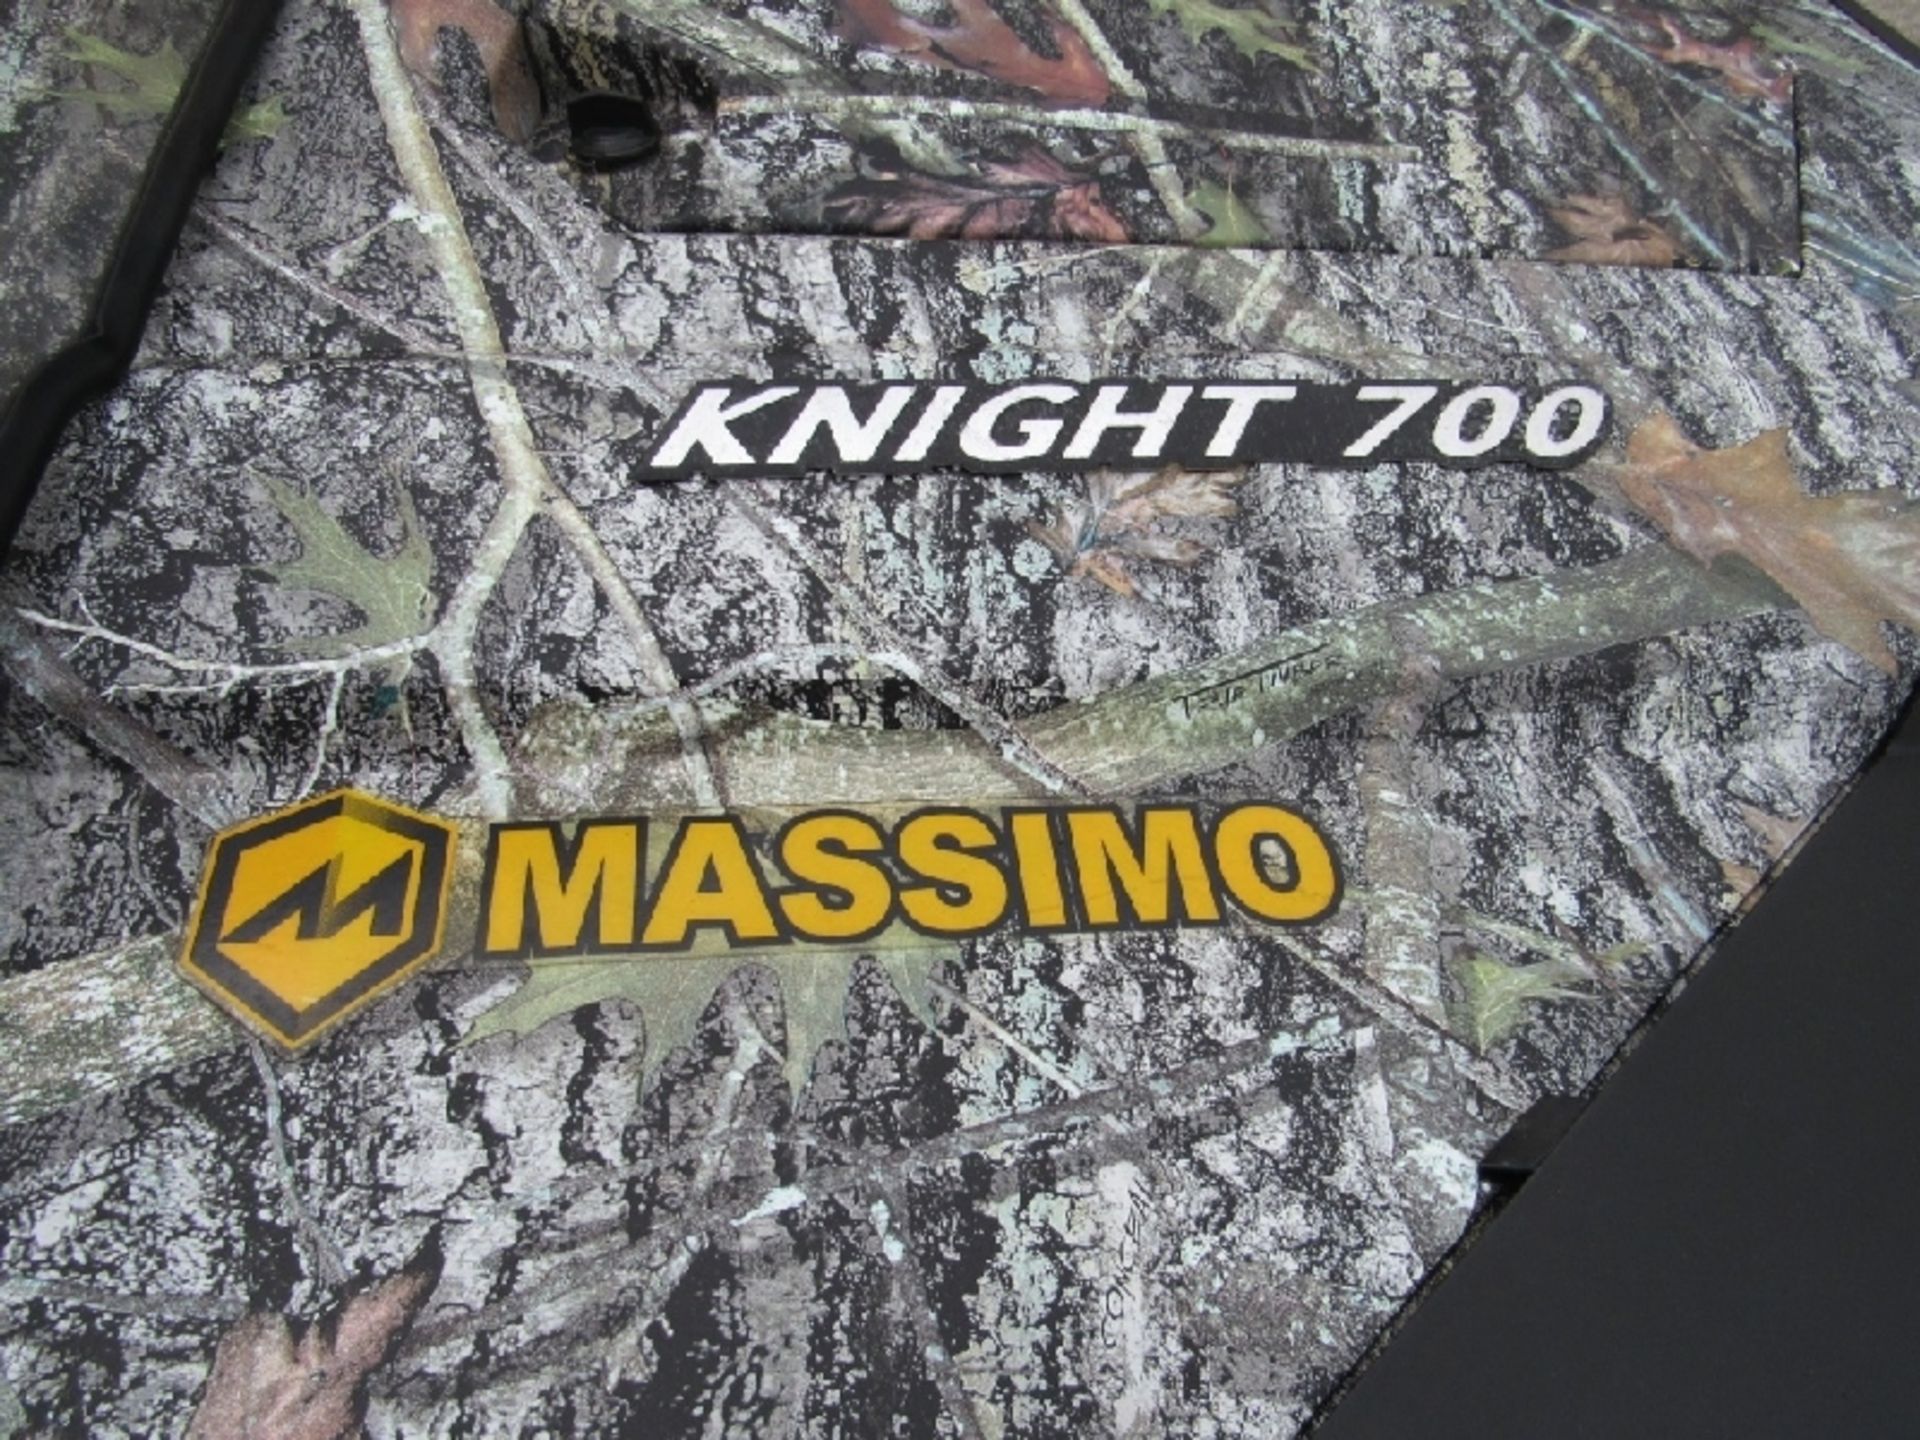 2015 Massimo Knight 700- ***Located in Chattanooga TN*** MFR - Massimo Model - Knight 700 VIN - - Image 2 of 16